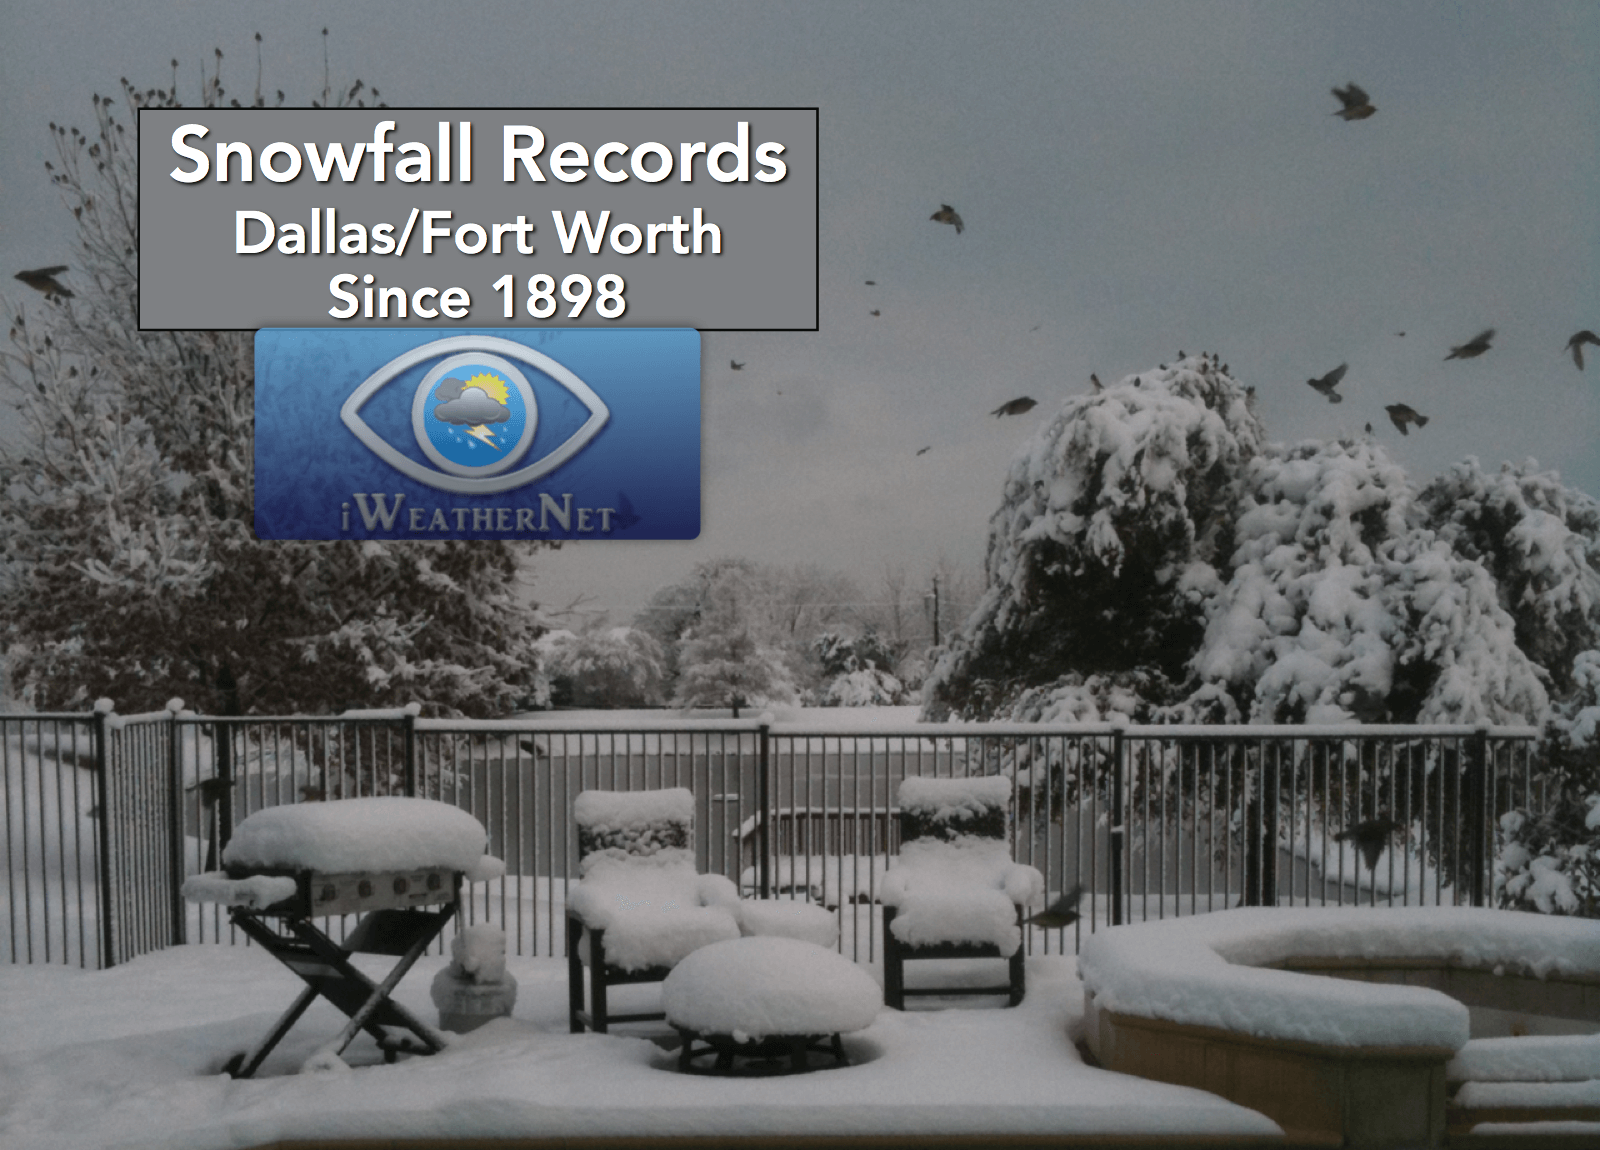 Snowfall records for every year since records began